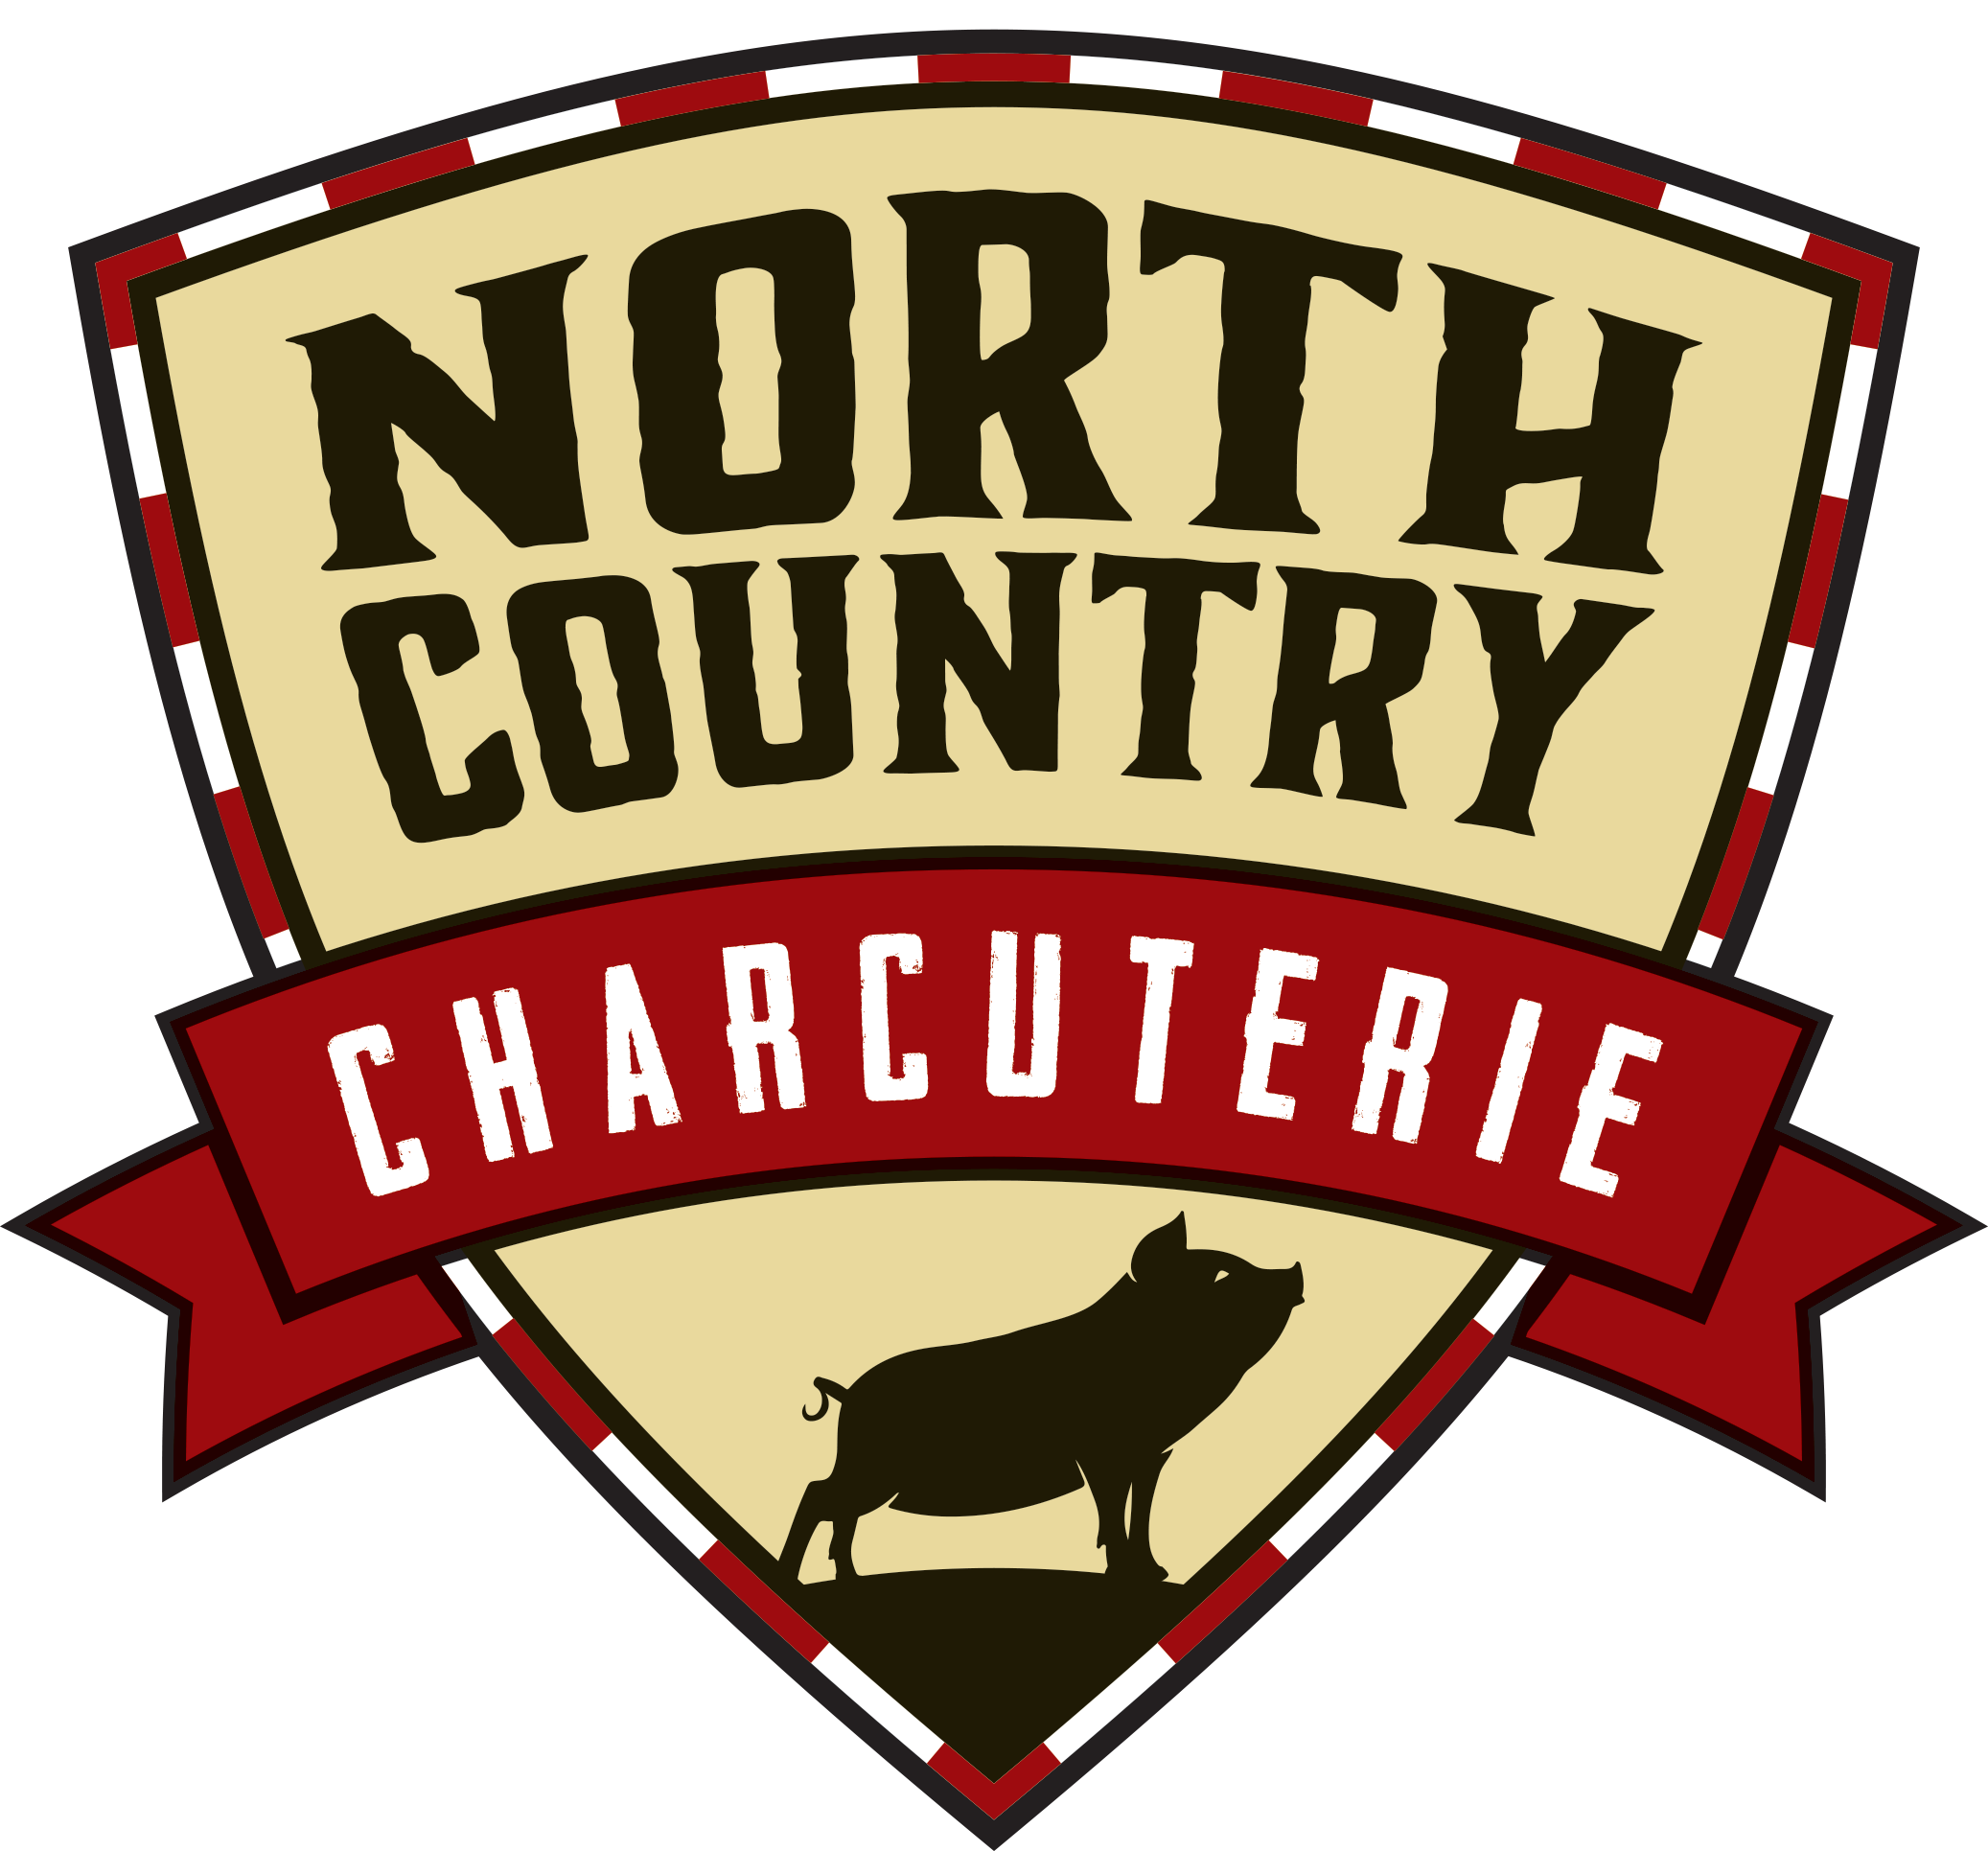 Gift Cards - North Country Charcuterie